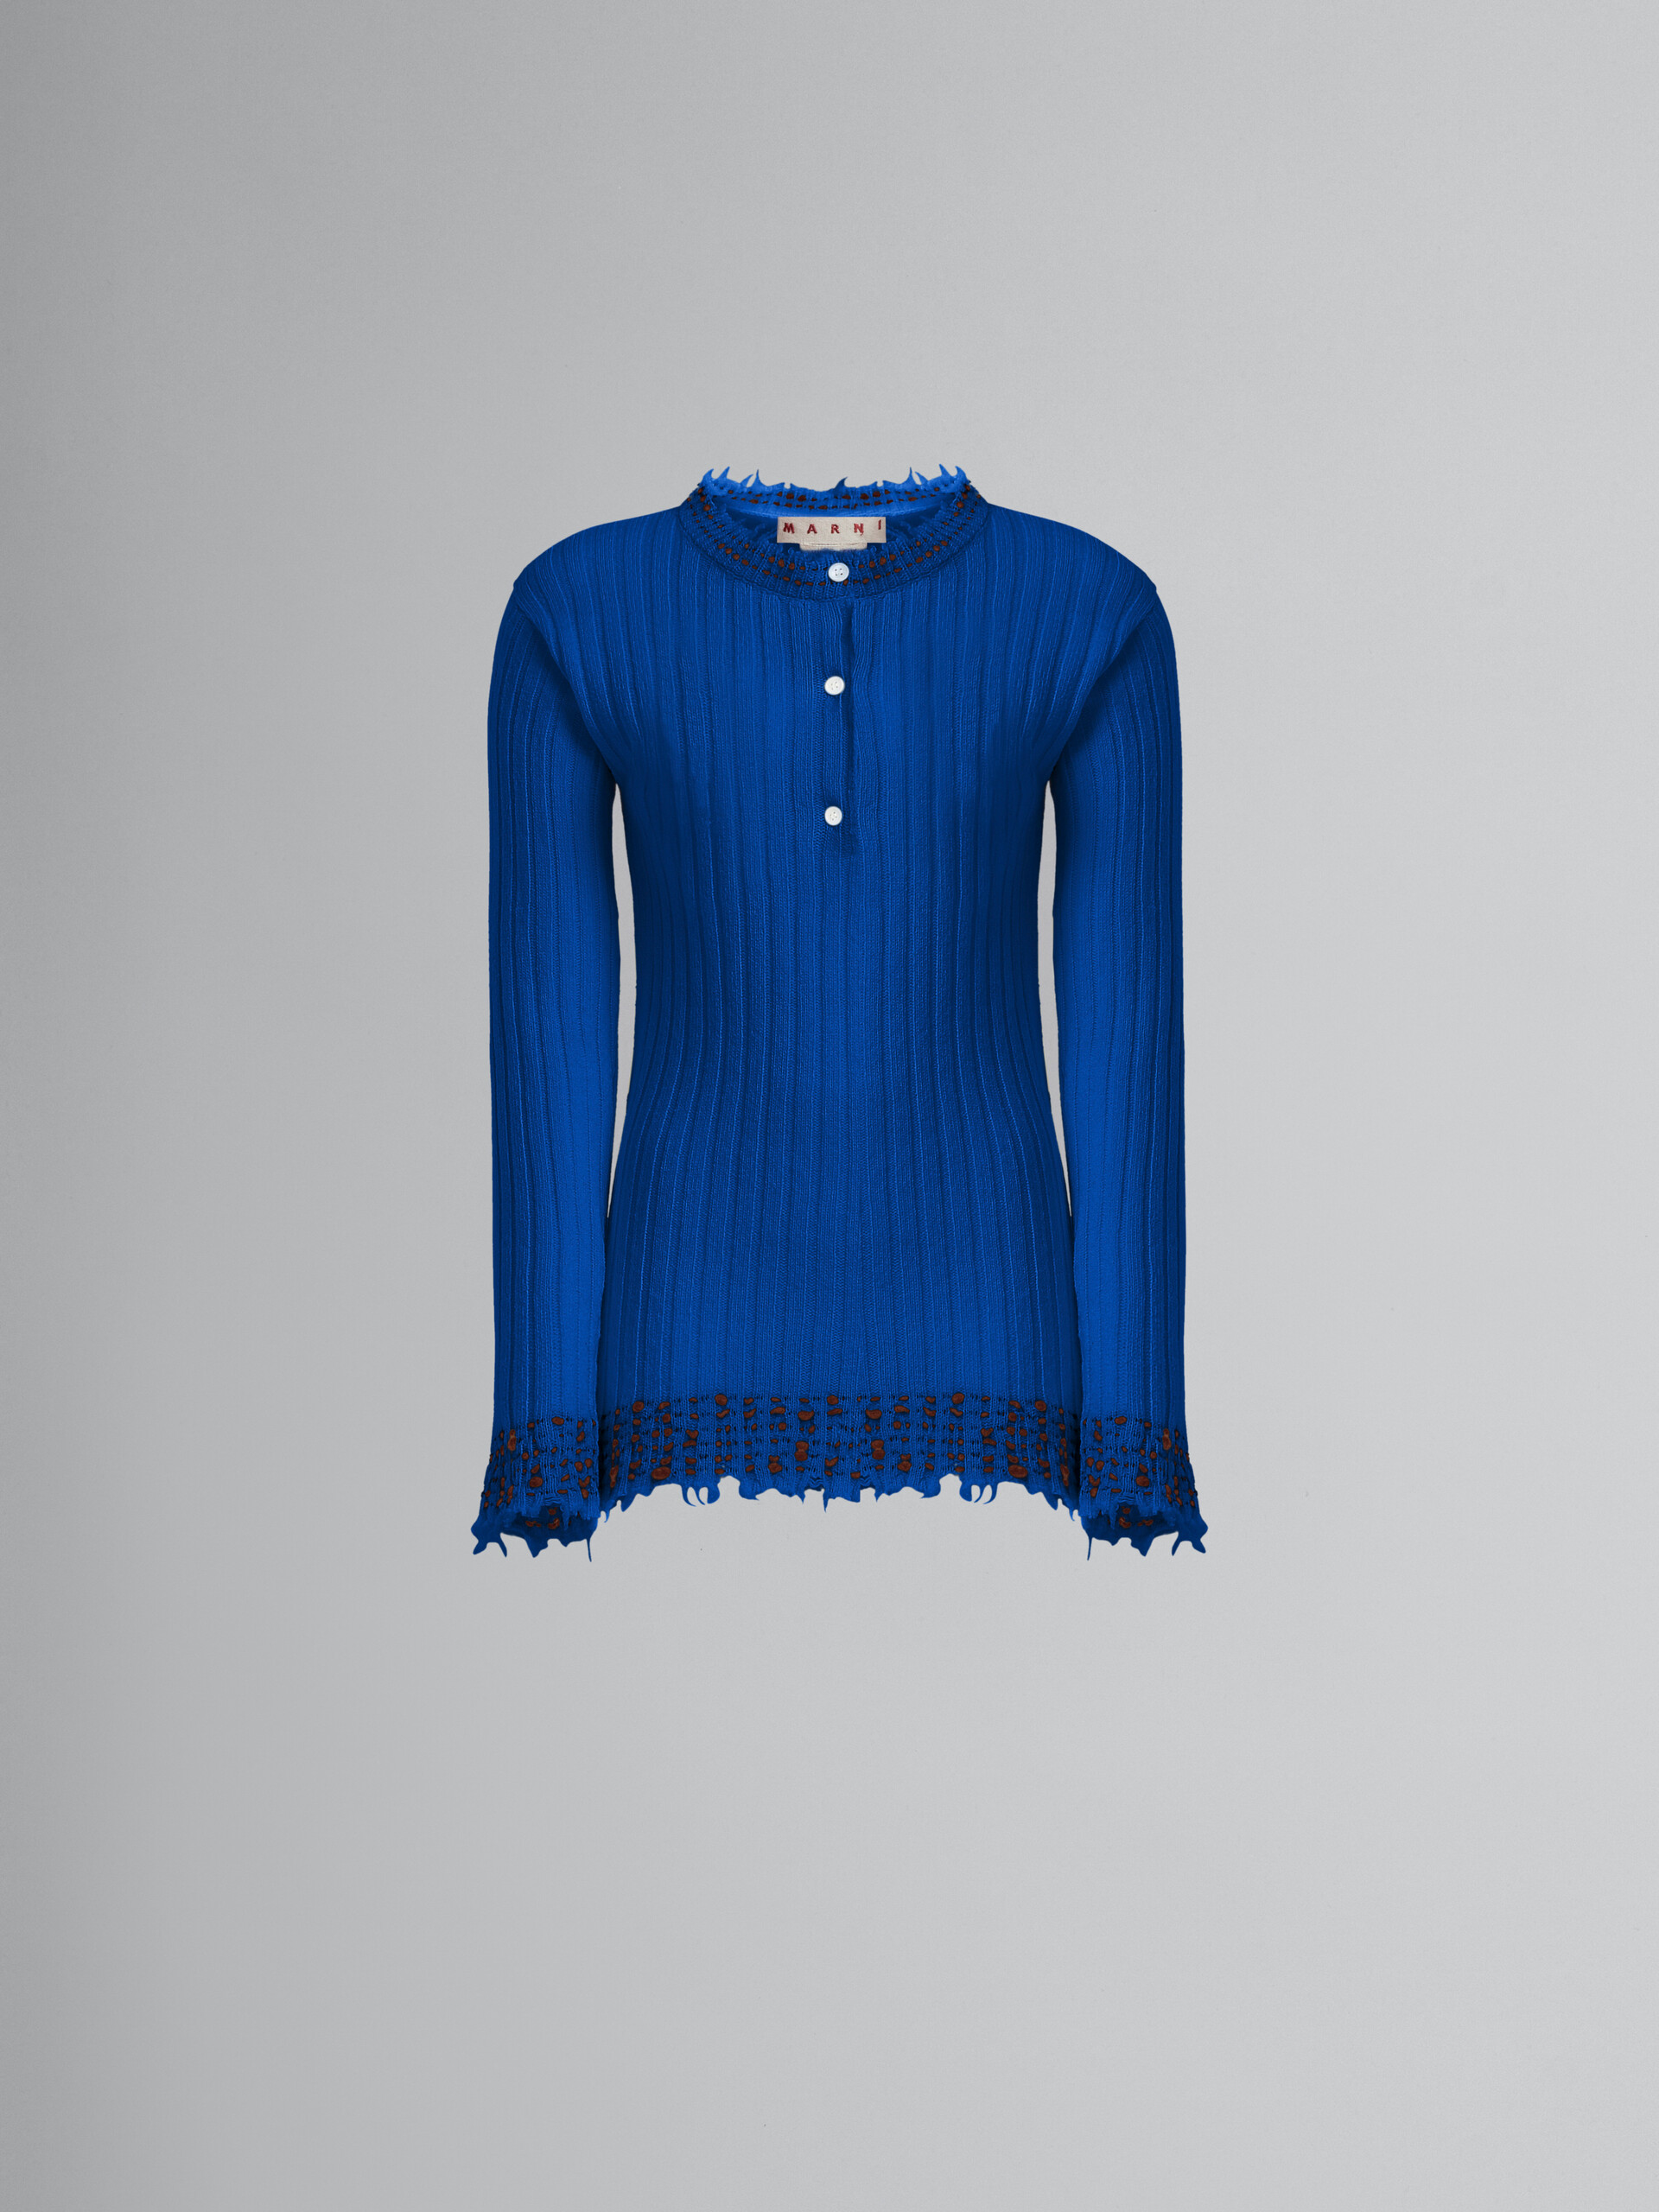 Blue knitted wool sweater - Pullovers - Image 1